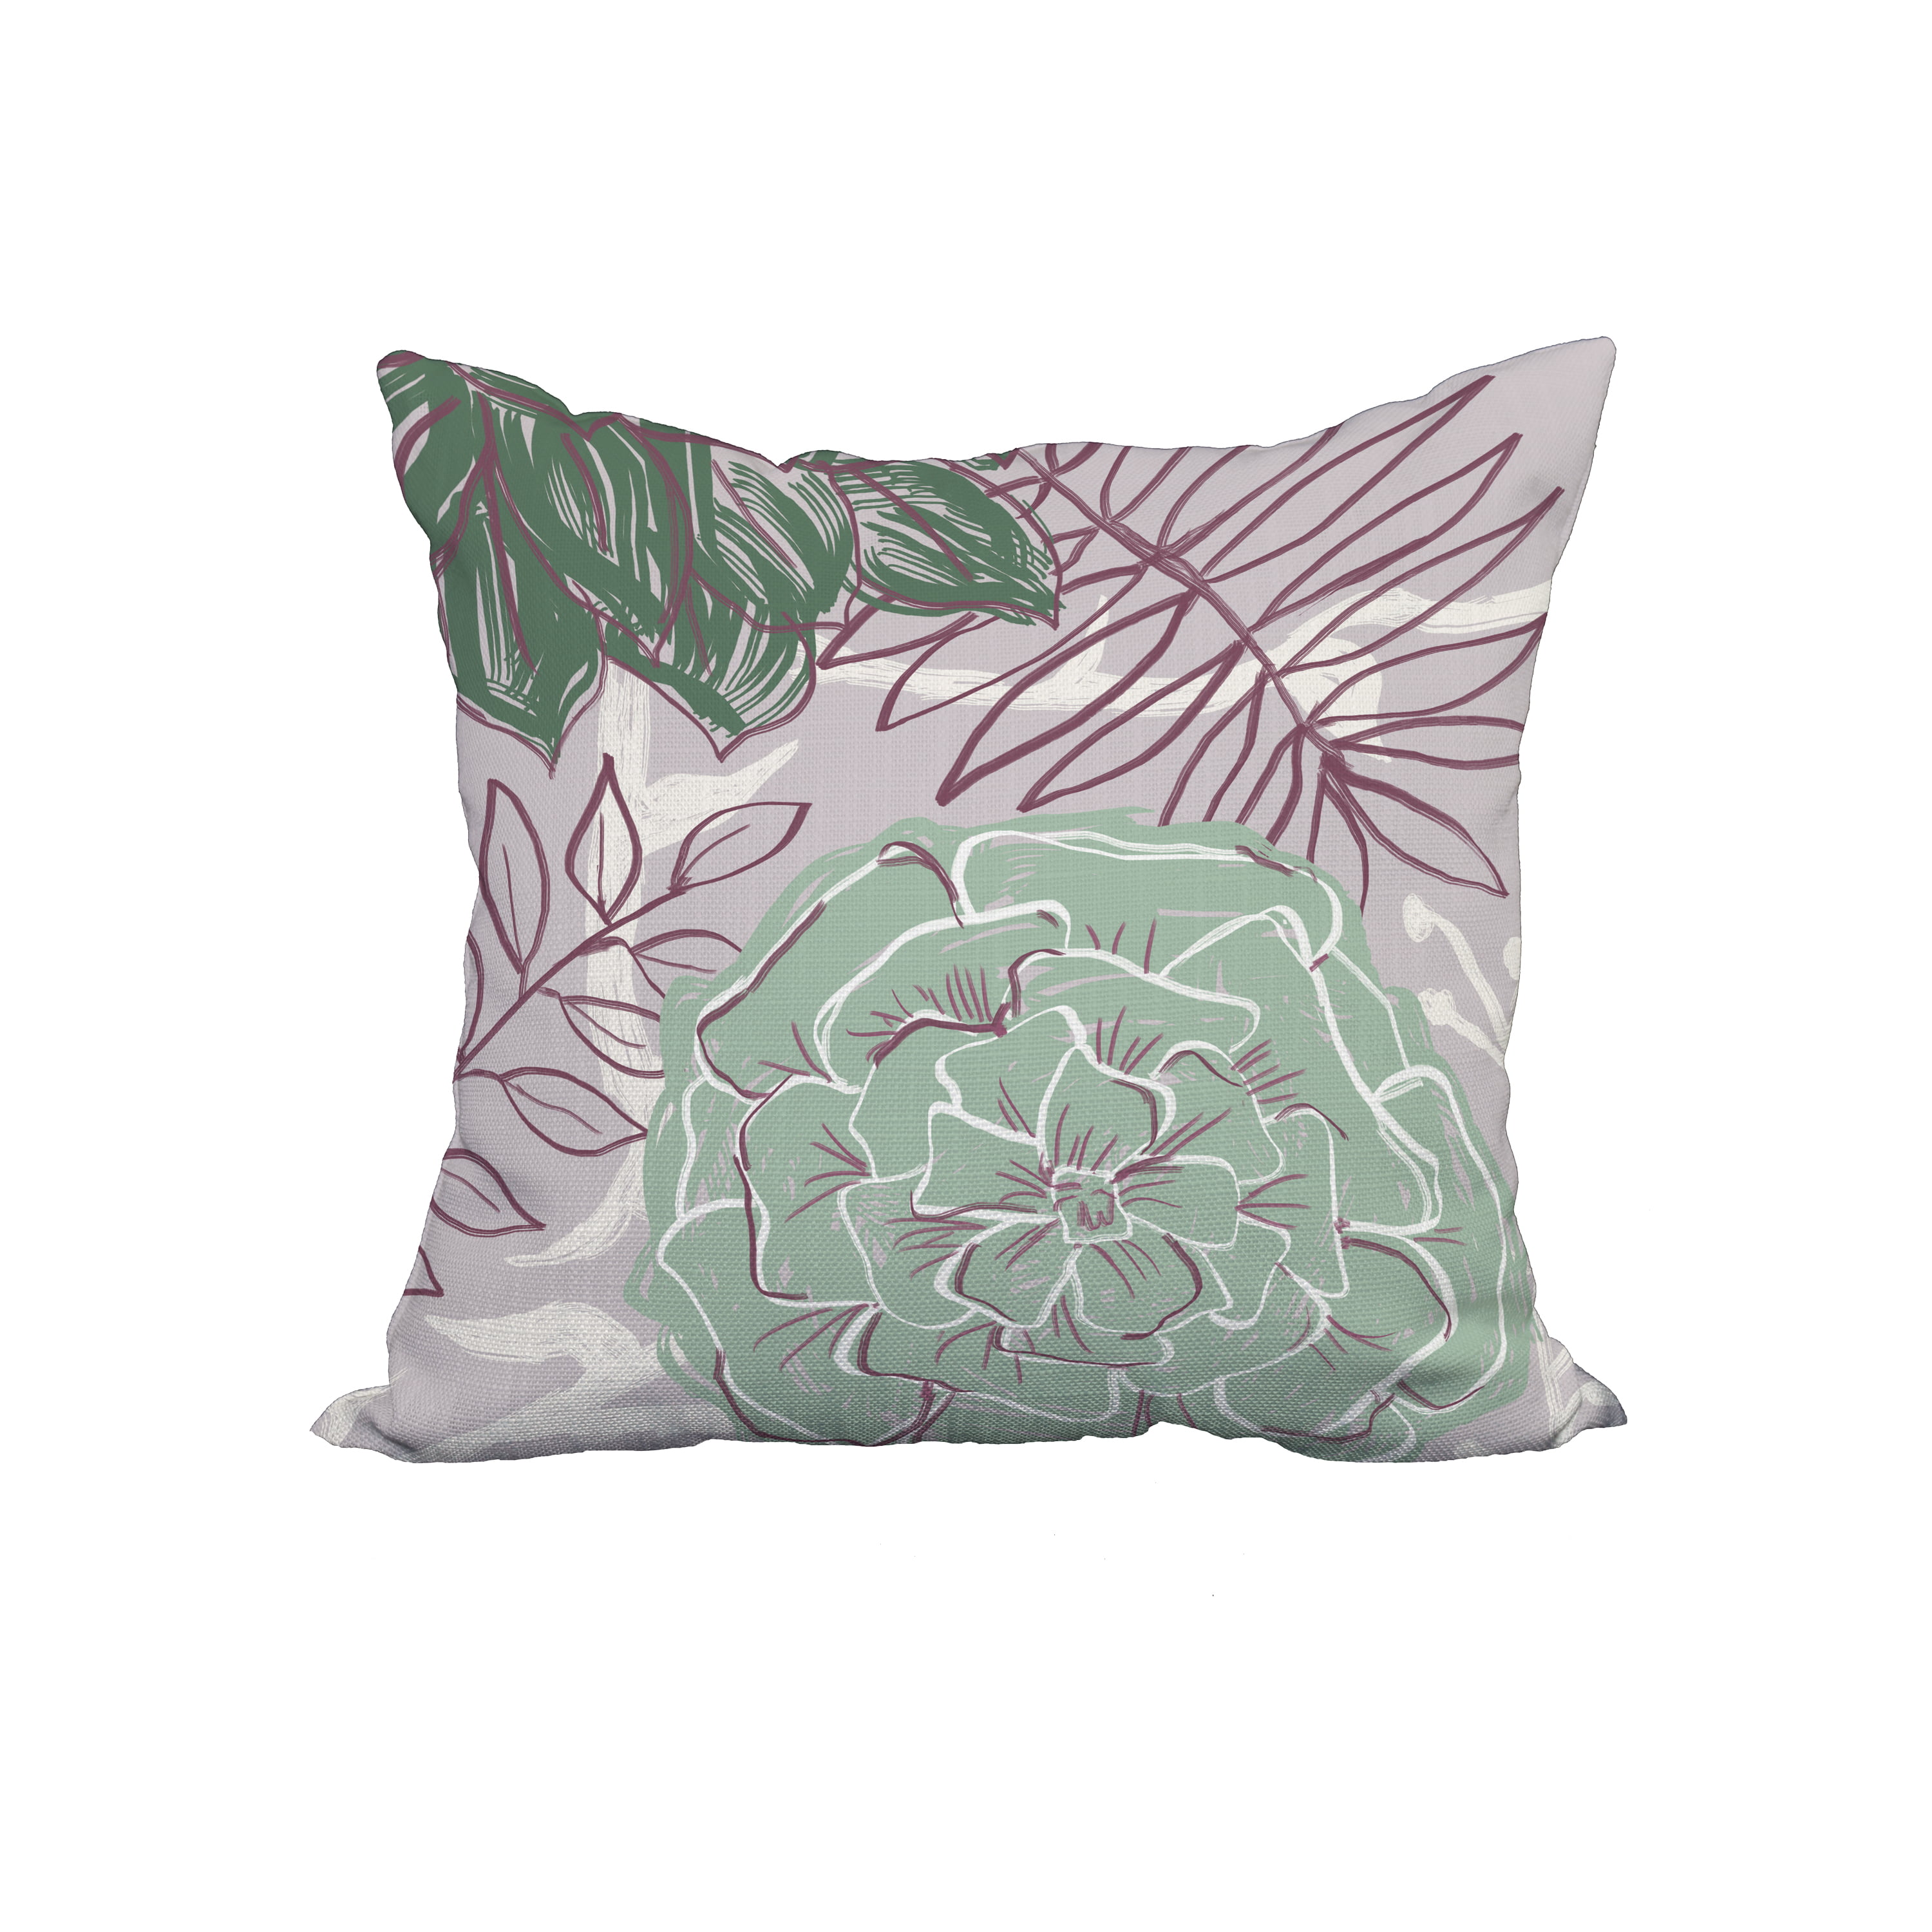 18 x 18 Inch Green Floral Print Decorative Polyester Throw Pillow with ...